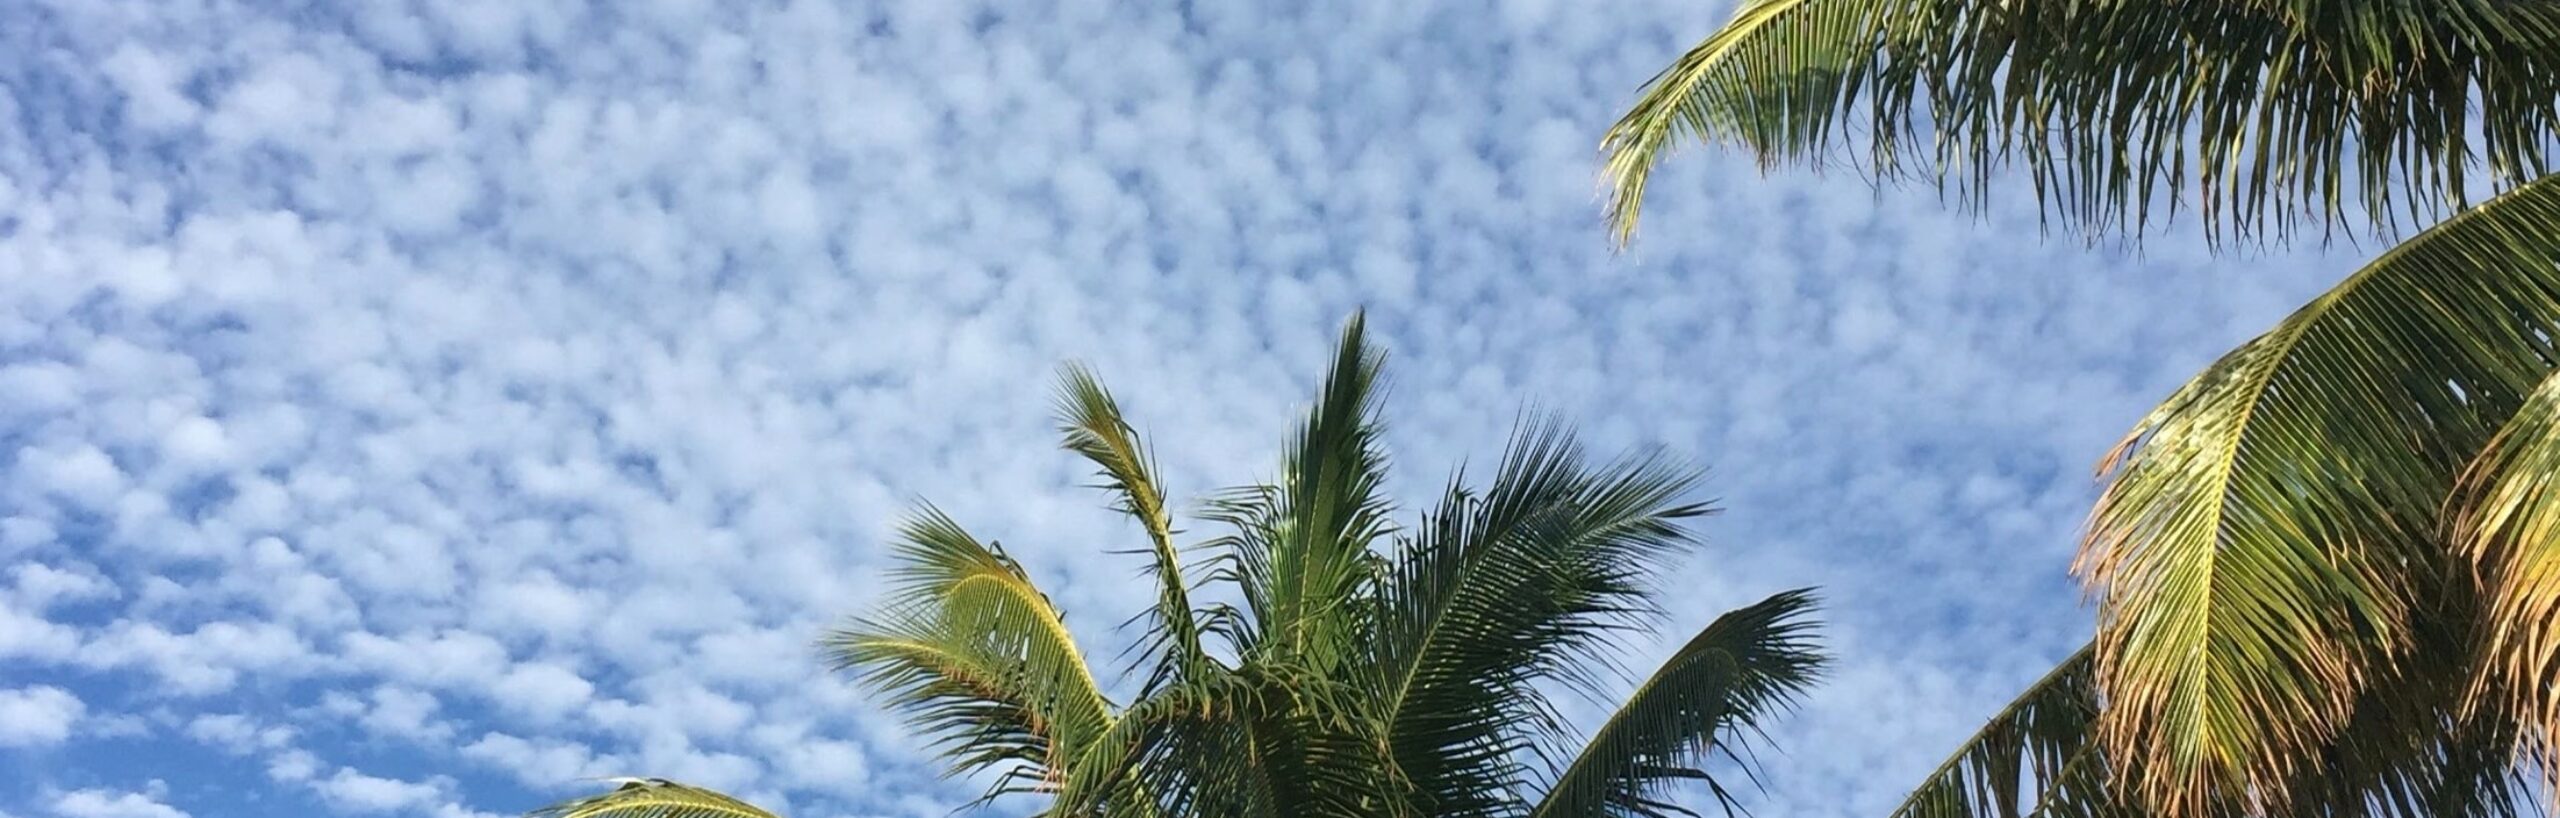 Video & TCP optimisation: Looking up into bright blue sky with white clouds, and the tops of palm trees